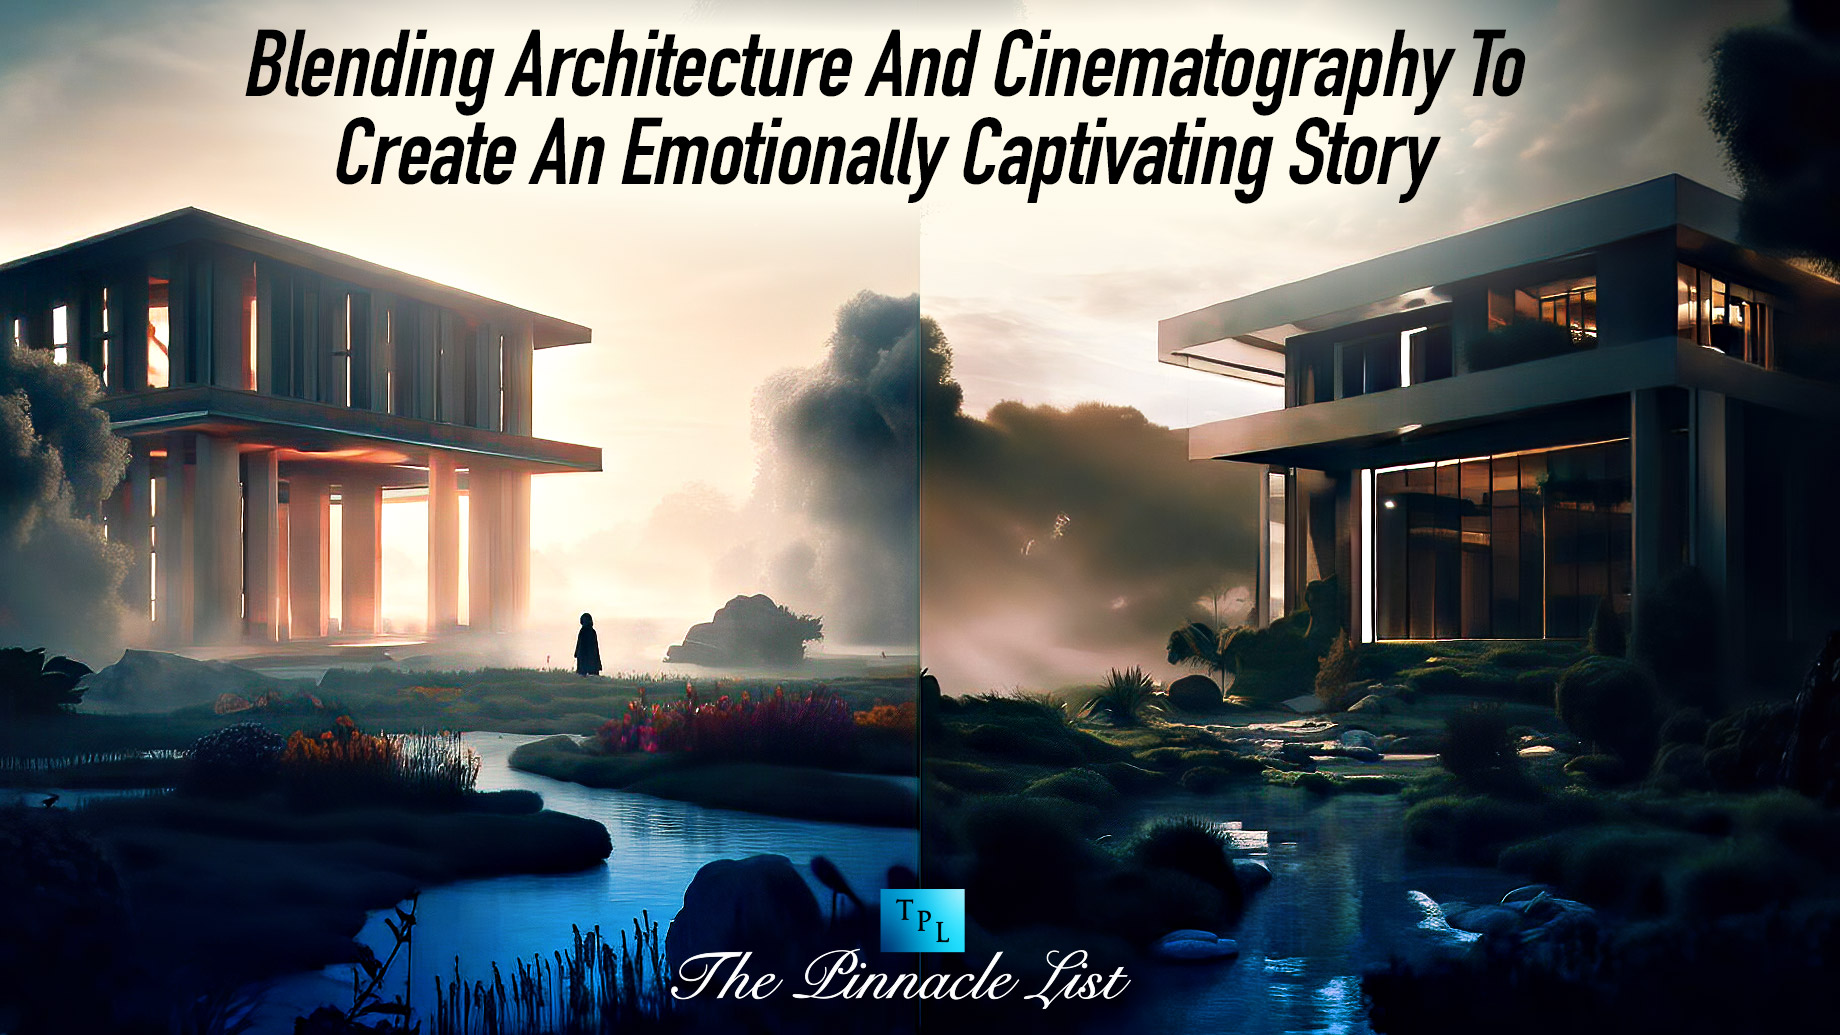 Blending Architecture And Cinematography To Create An Emotionally Captivating Story